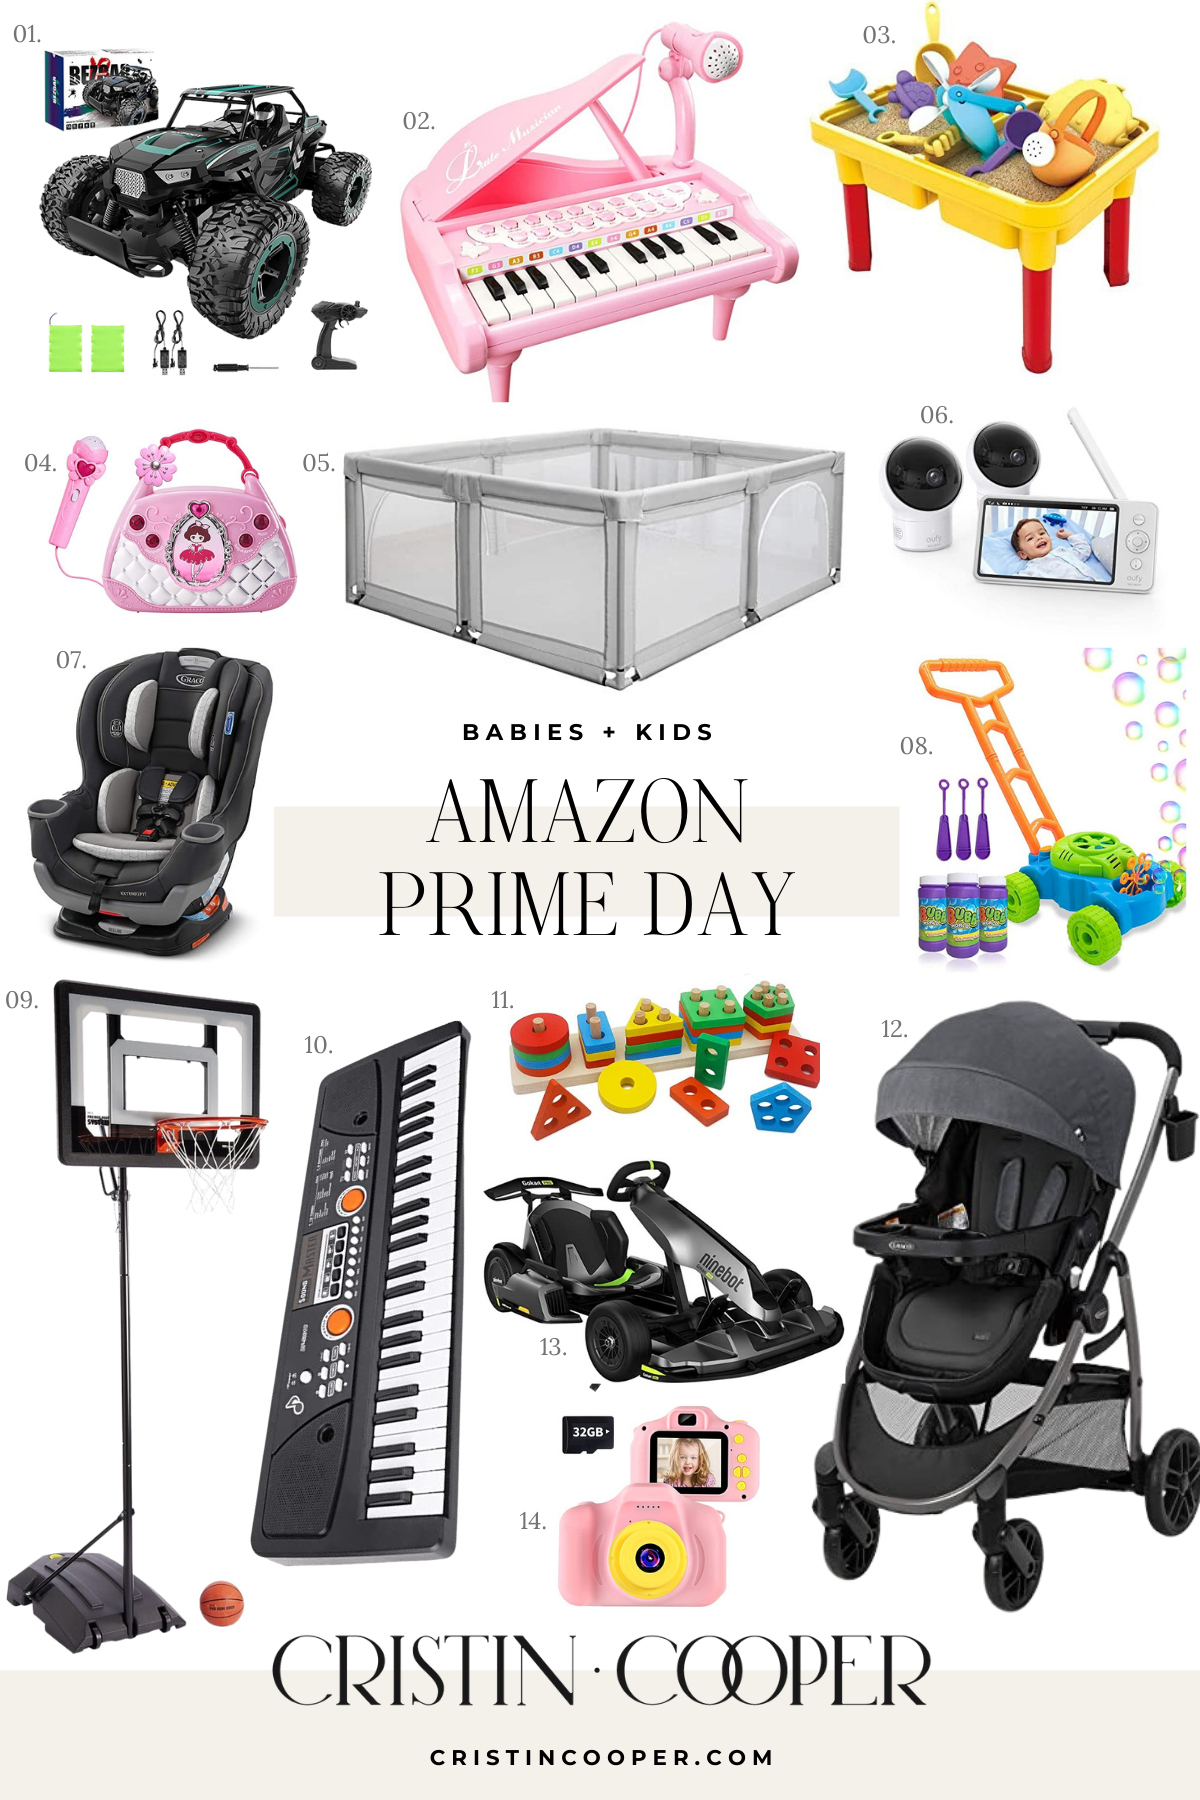 Amazon Prime Day Babies + Kids Collage 